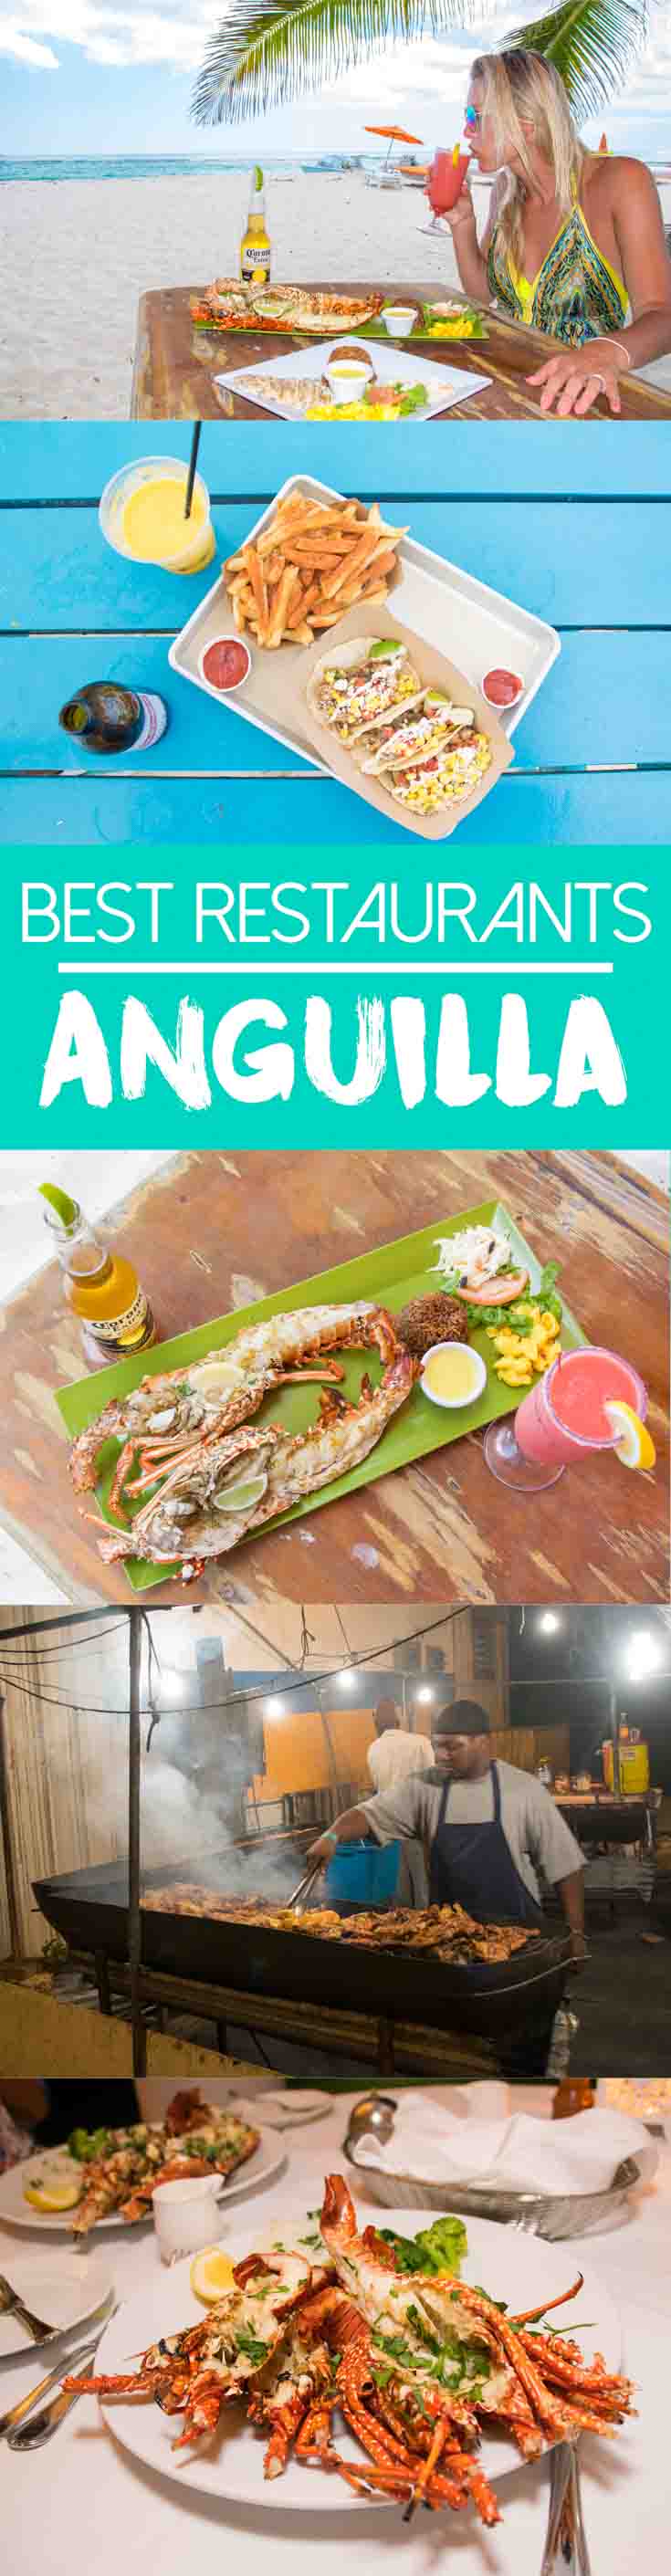 The Best Restaurants in Anguilla in 2021 GETTING STAMPED